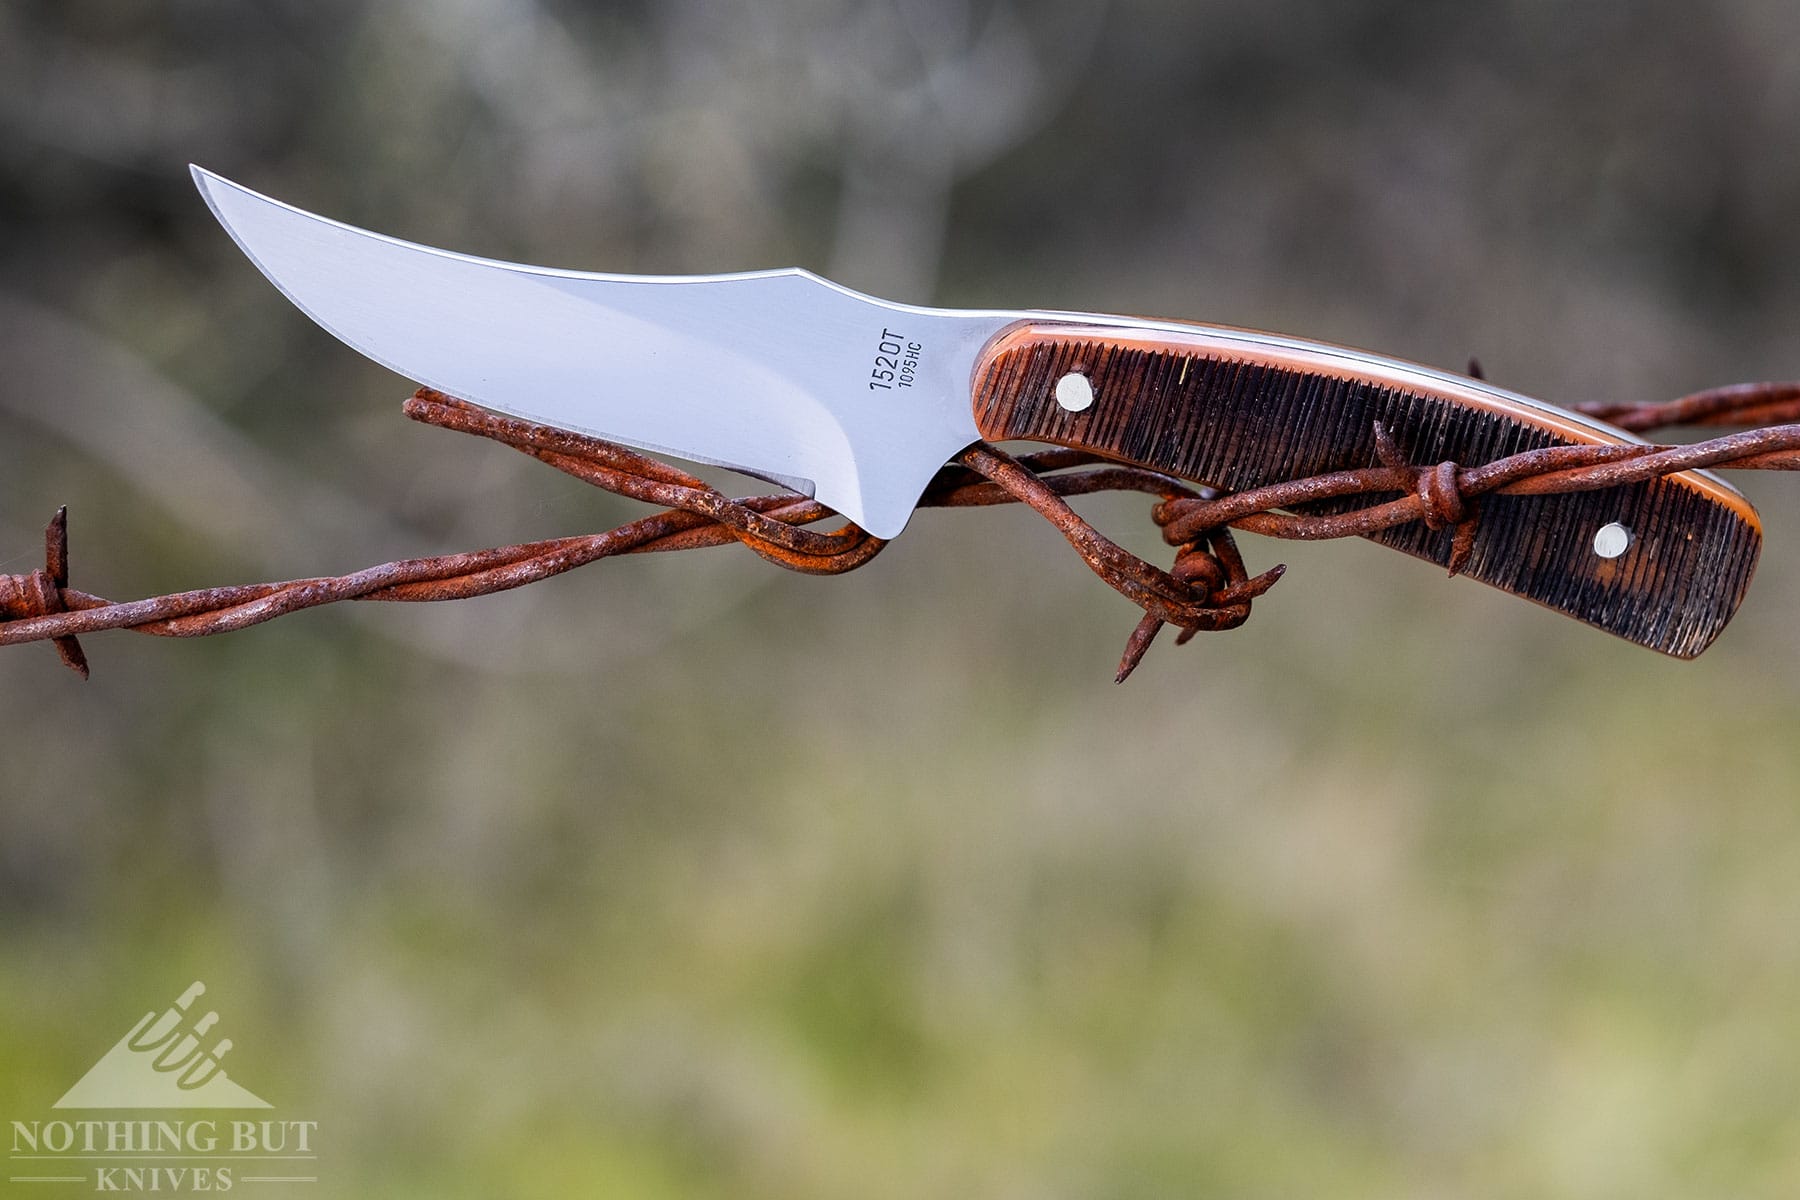 The 1520T Generational Series version of the Sharpfinger is made in America with better handle and blade material. 